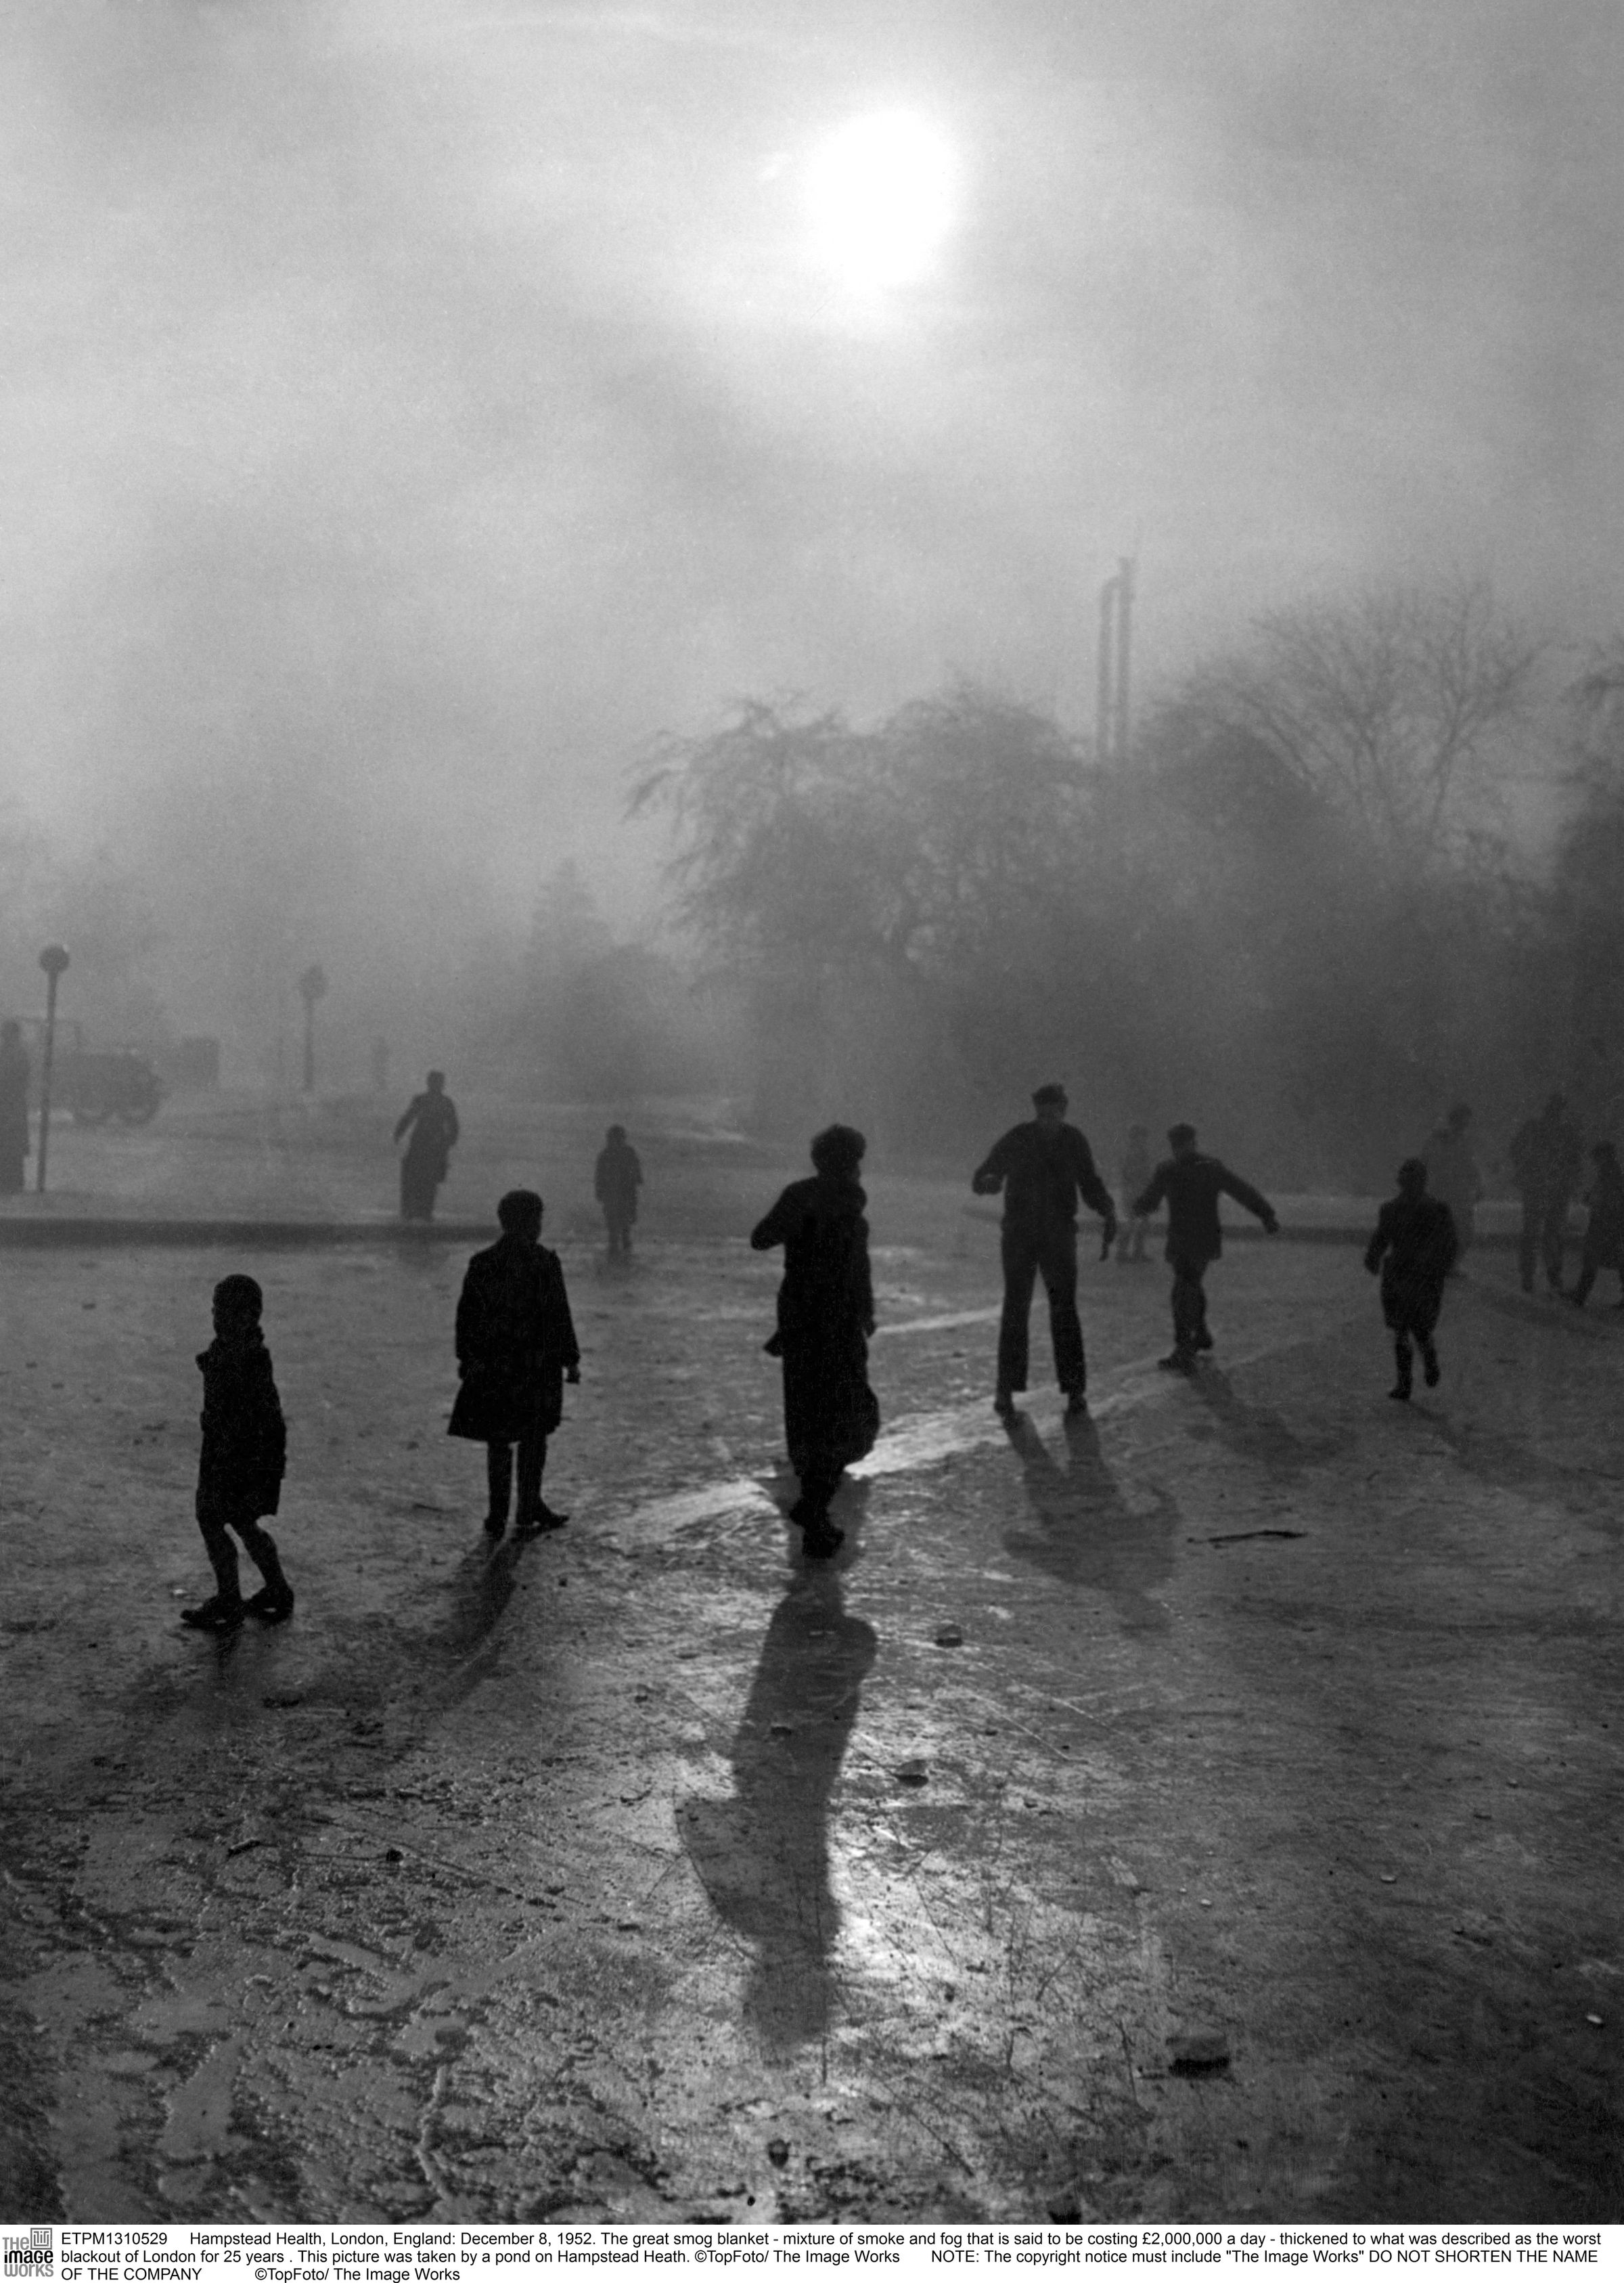 London during the Great Smog of 1952.